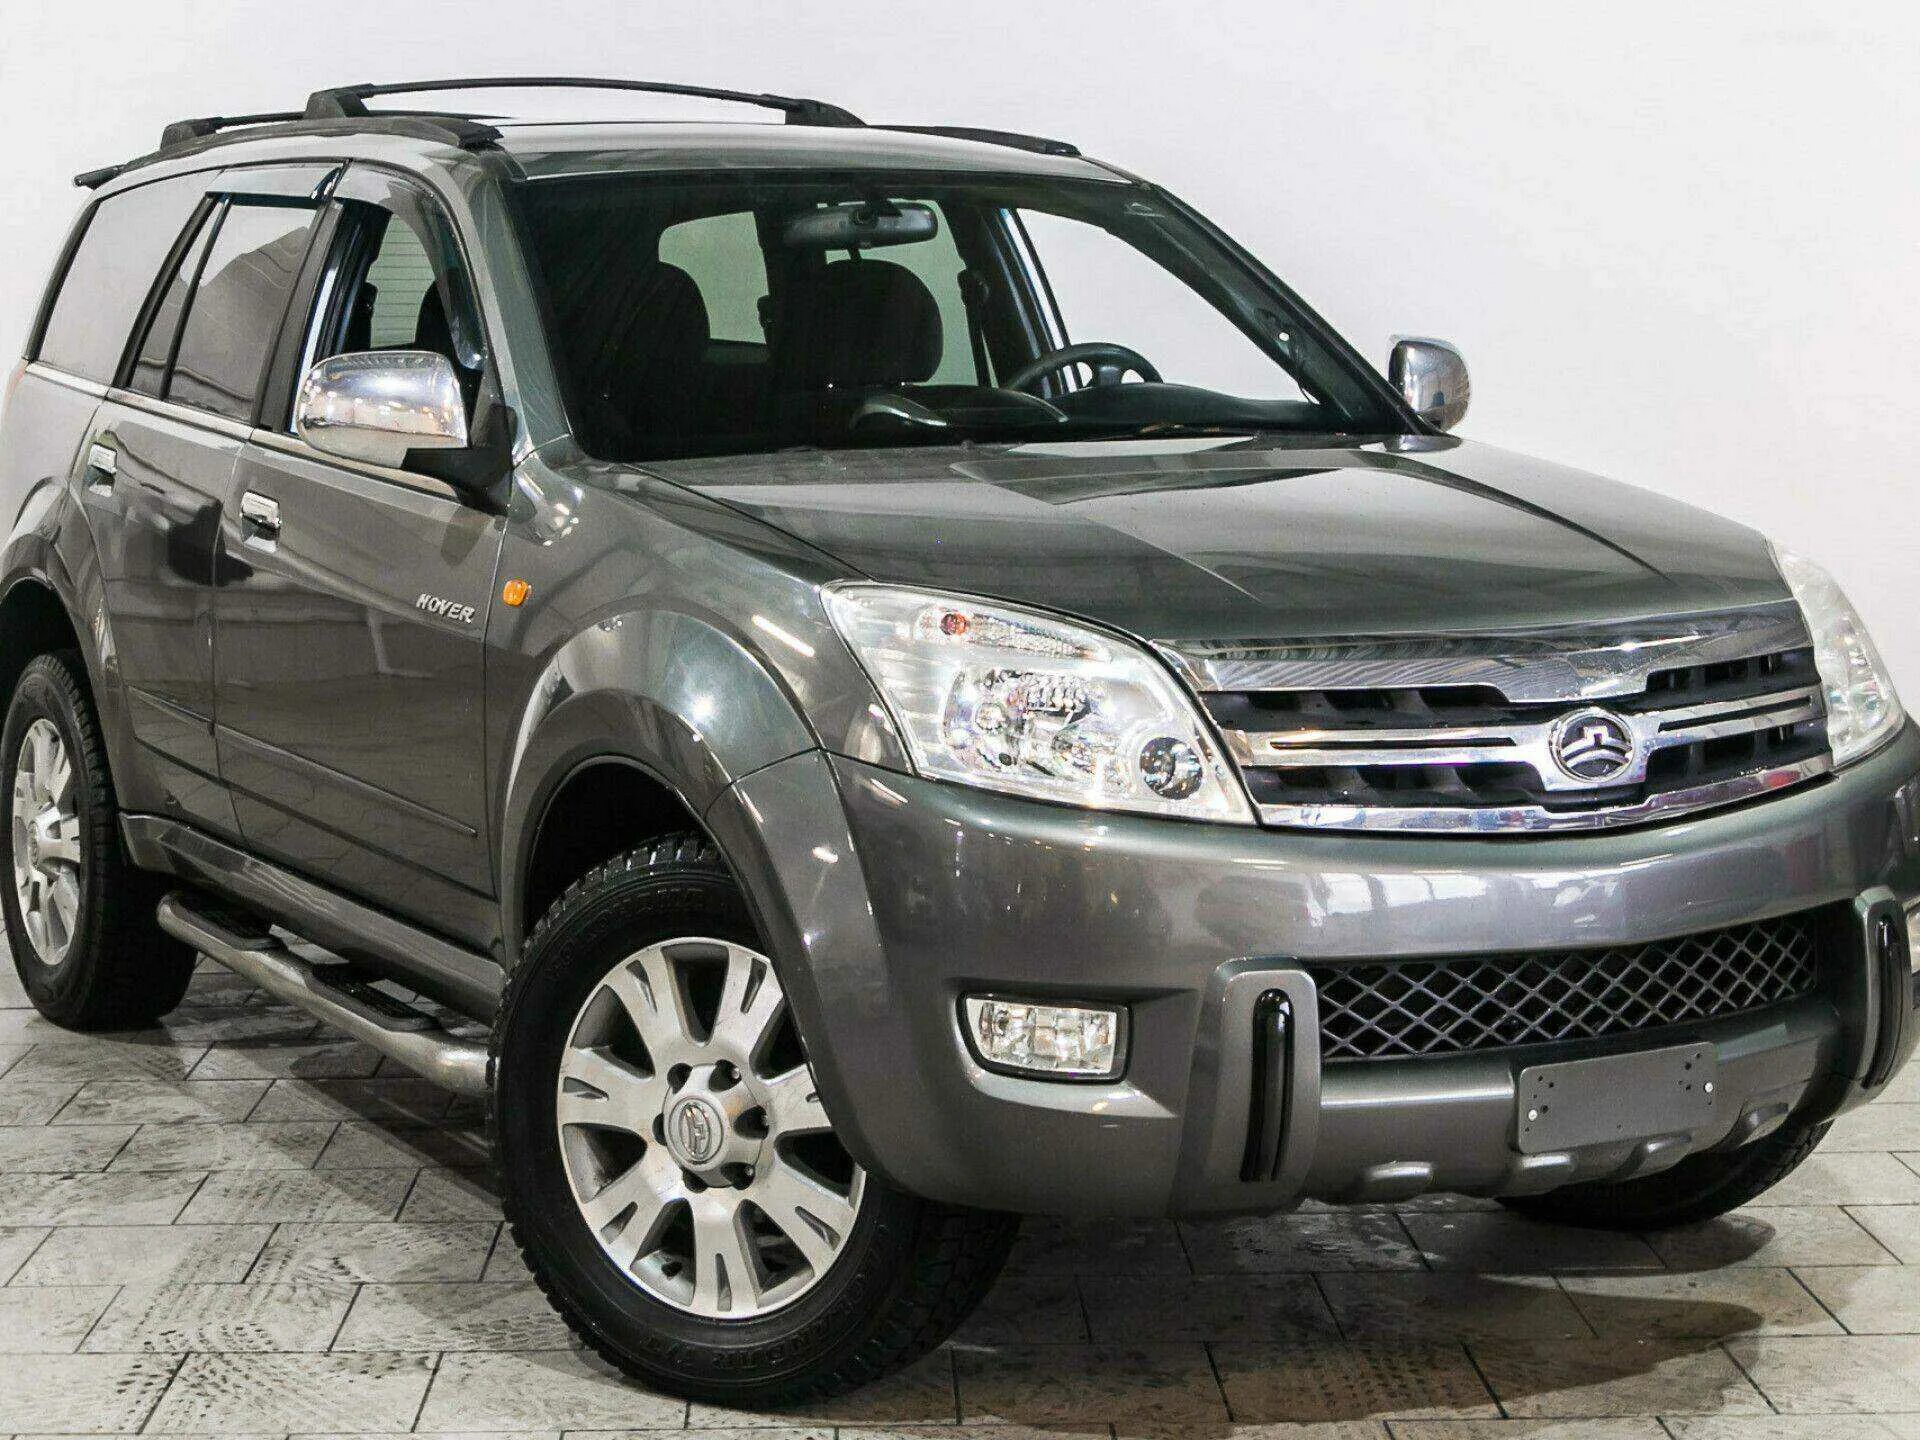 Great Wall Hover 2008. Great Wall Hover 2005. Great Wall Hover 2.4 МТ 2008. Great Wall 2008.